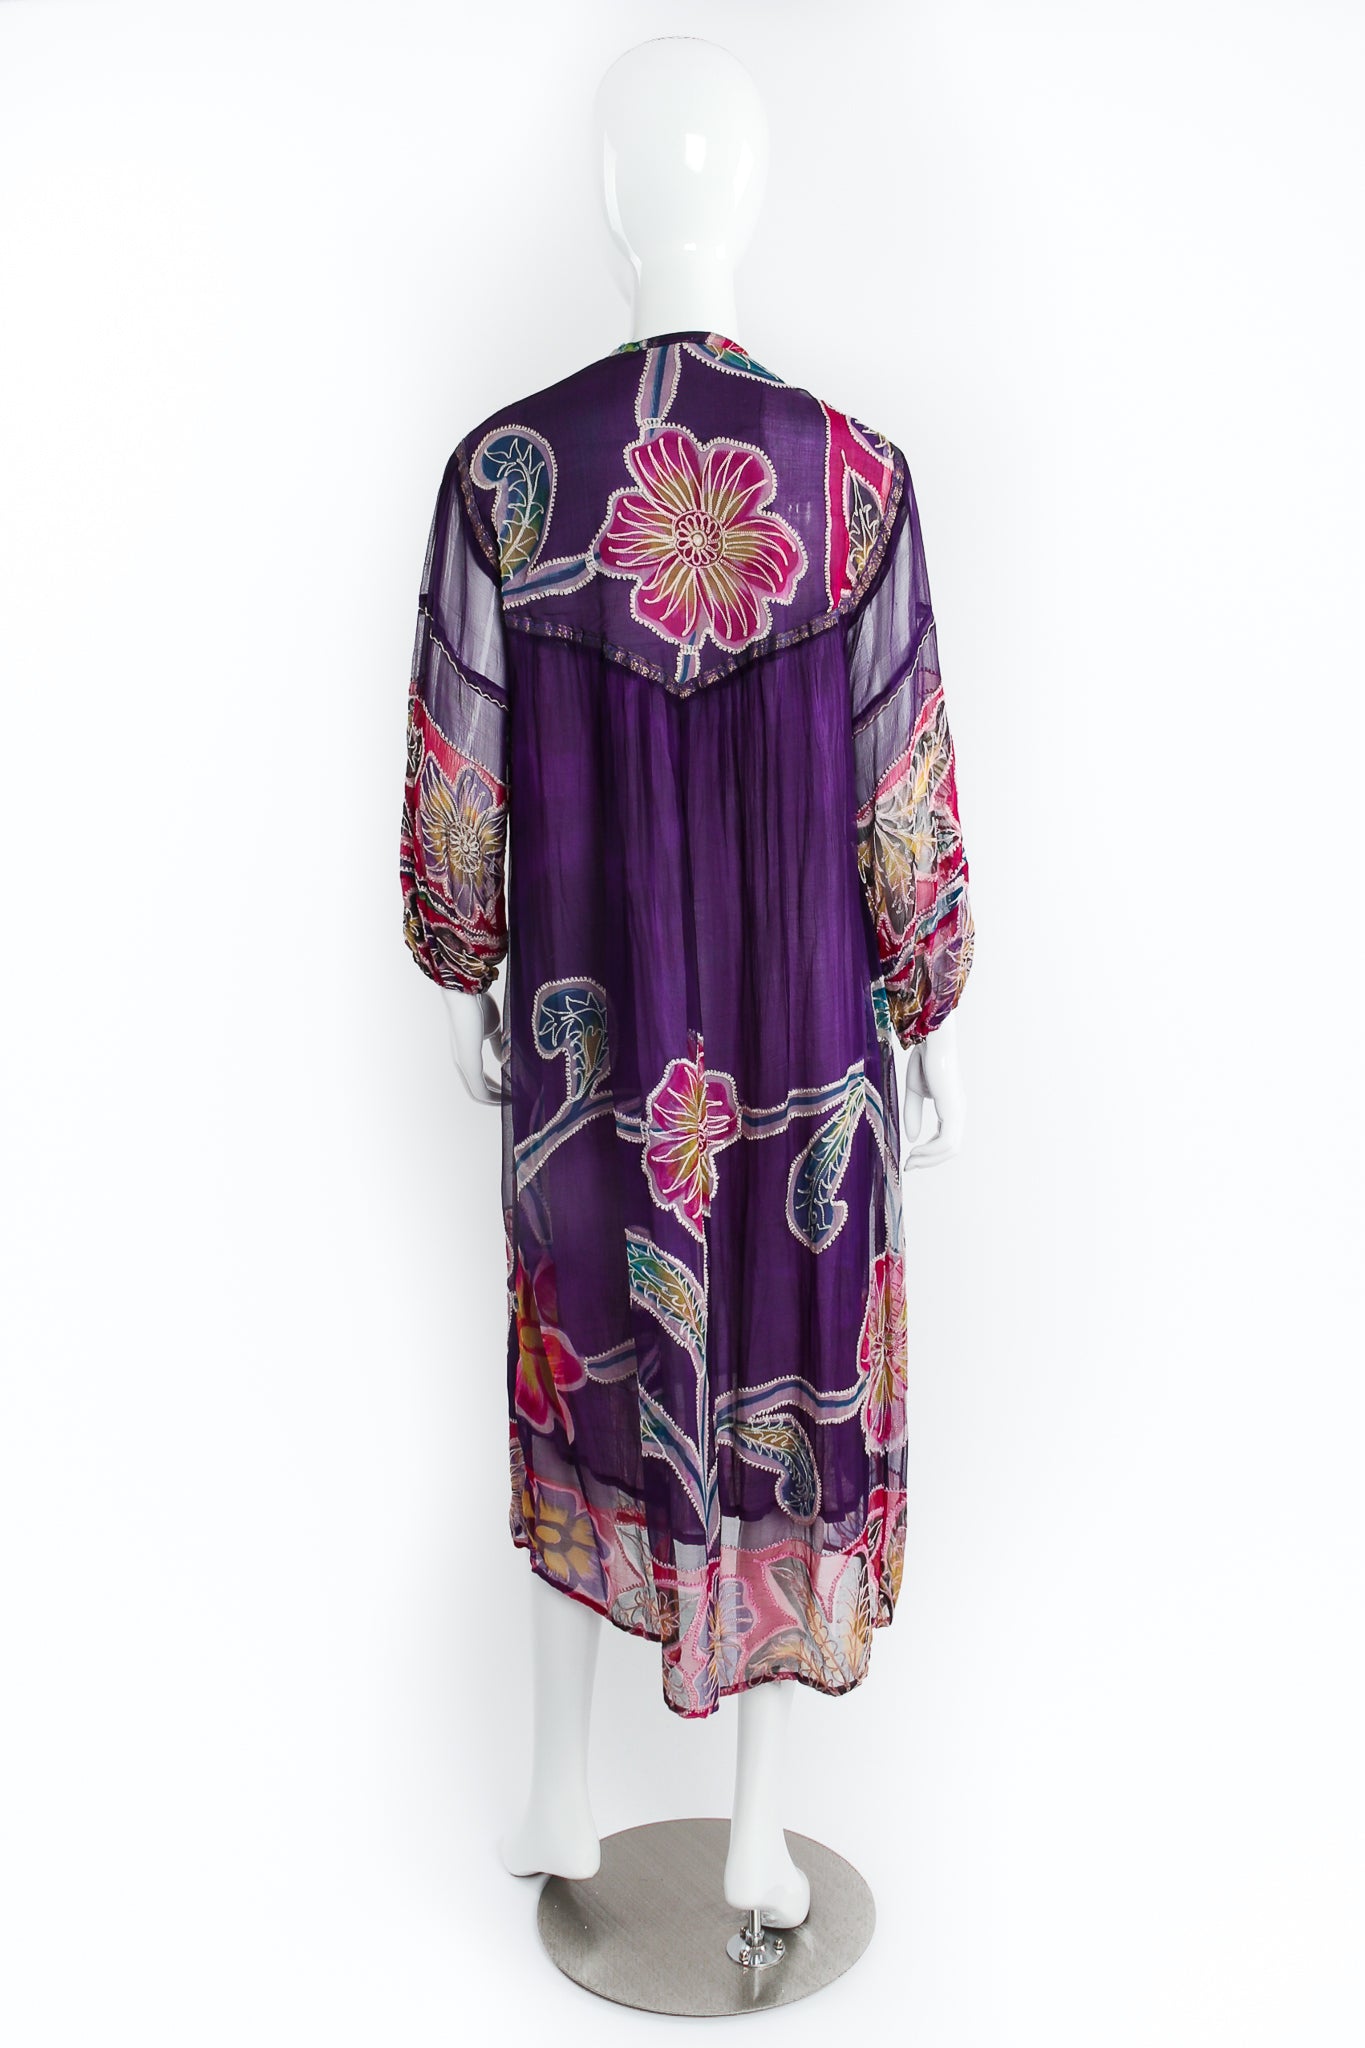 Vintage Silk Chiffon Floral Embroidered Indian Dress on Mannequin back at Recess Los Angeles